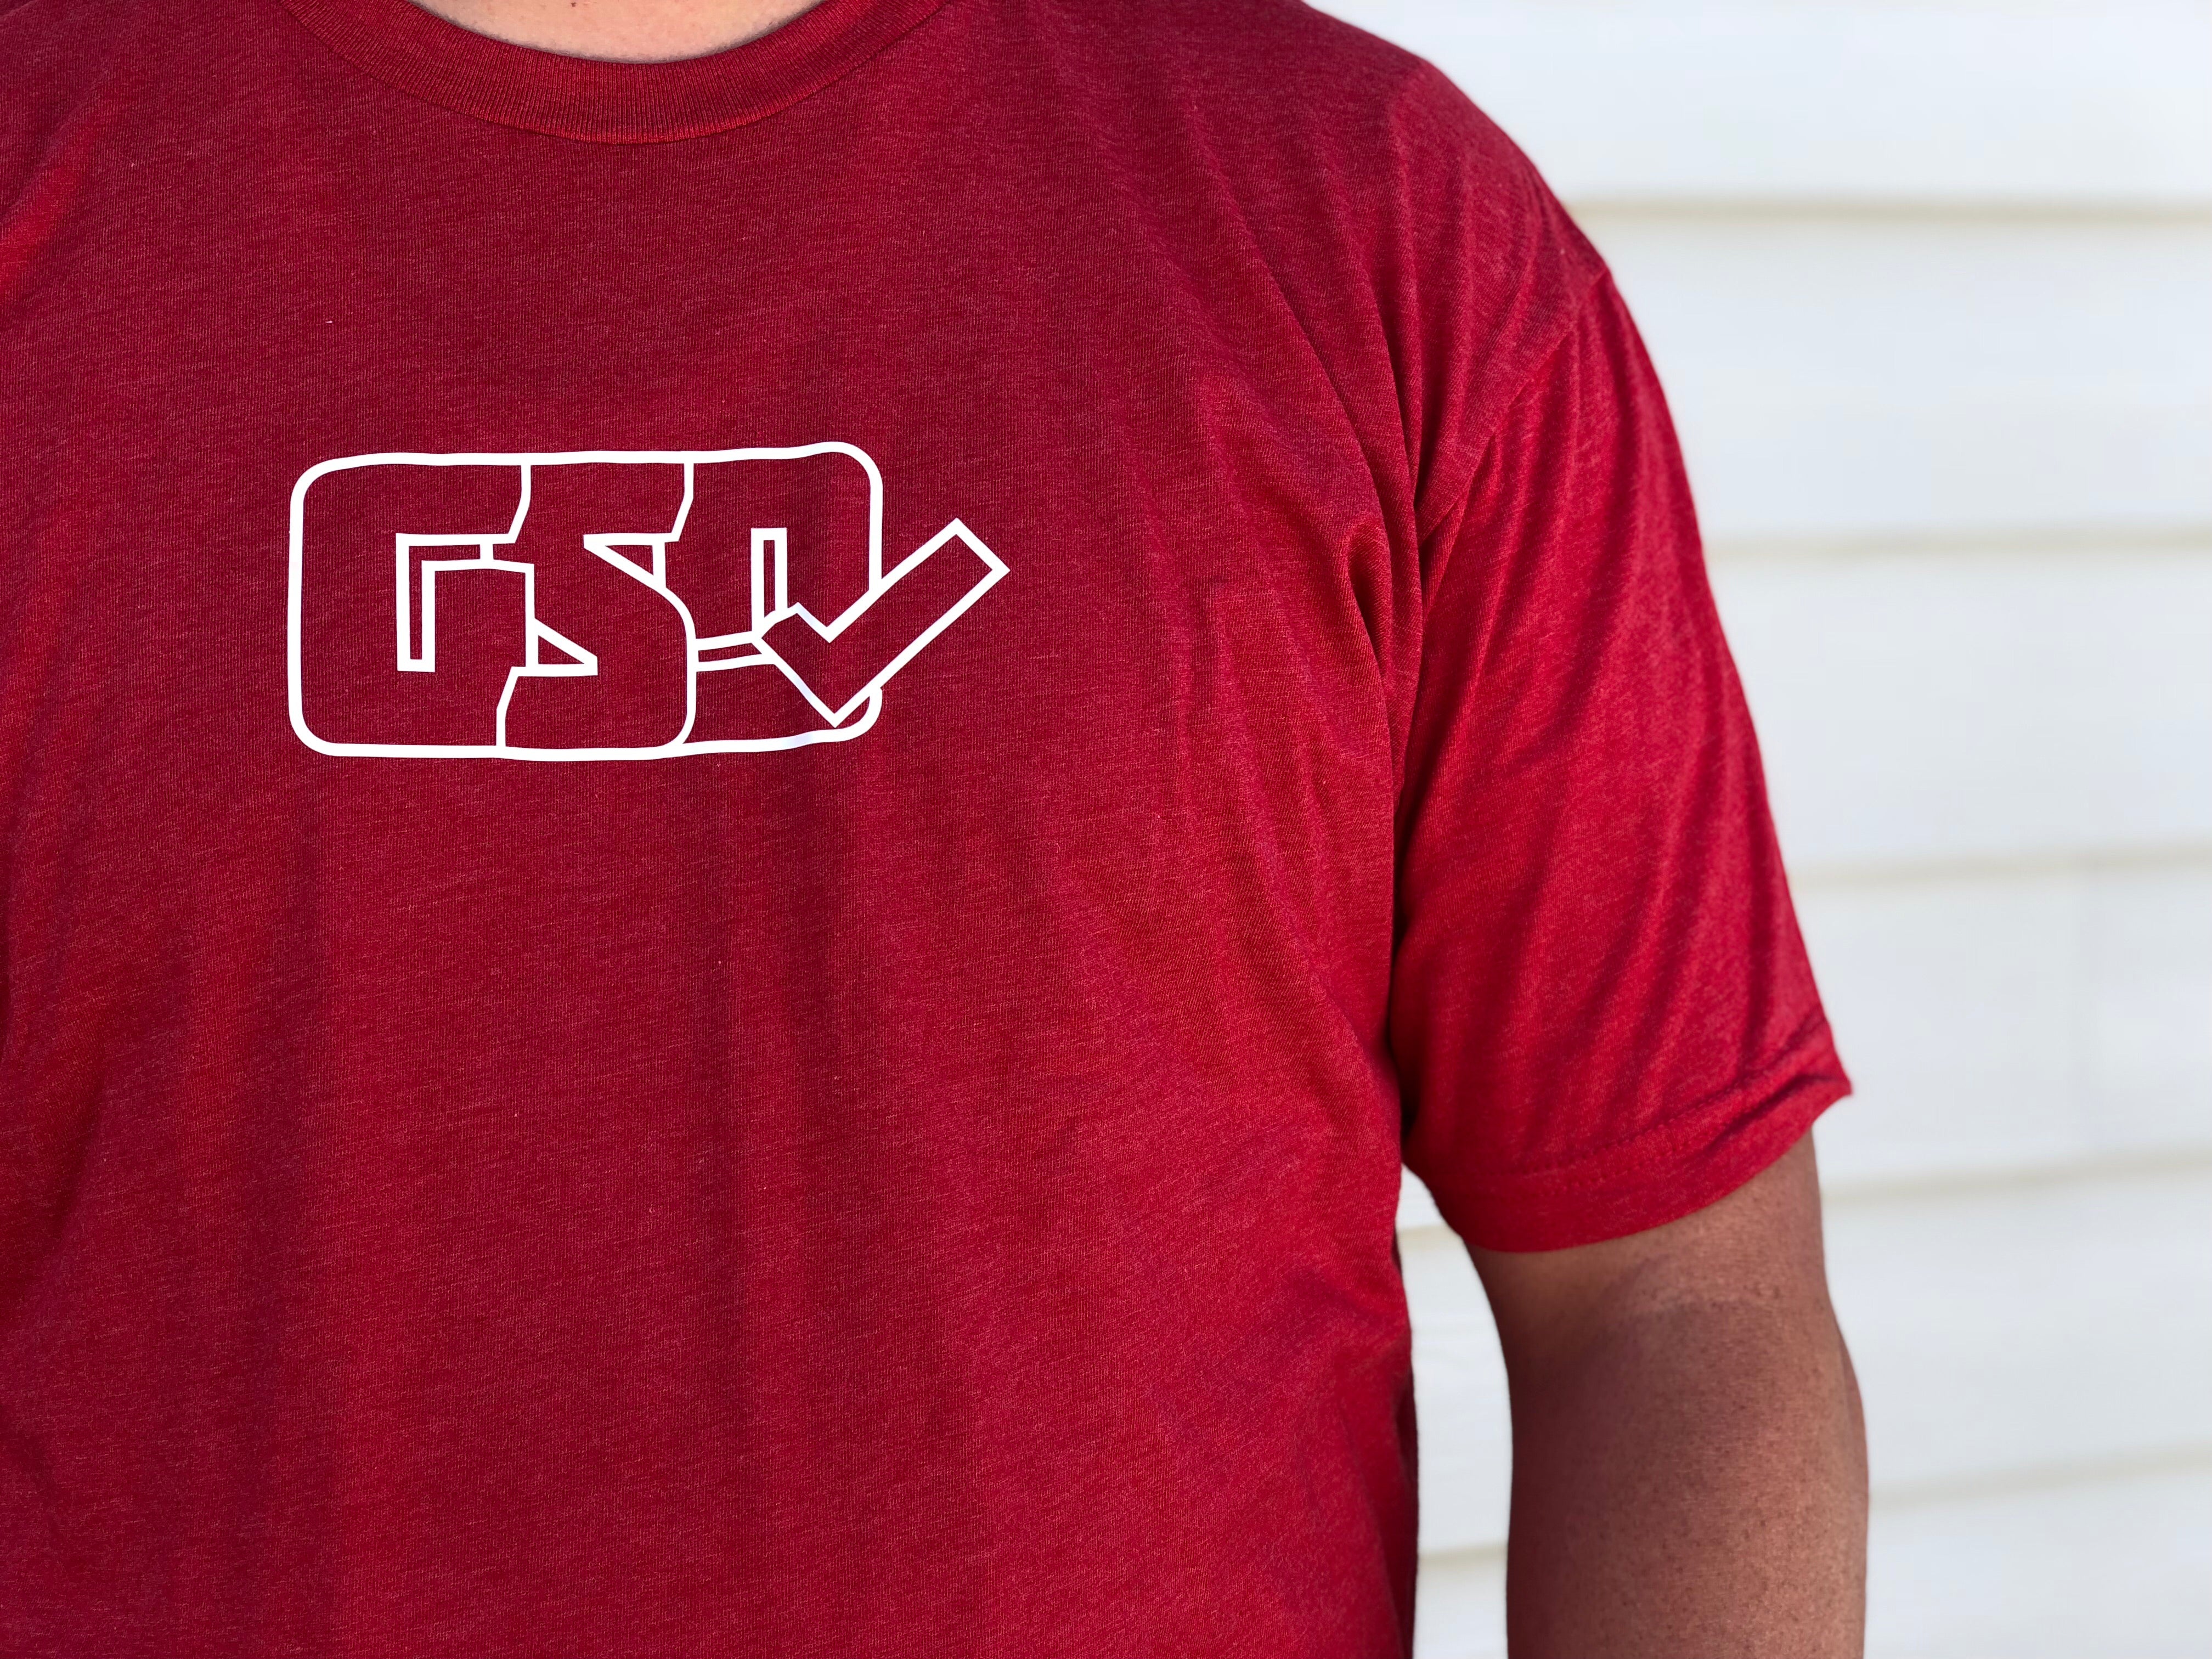 GSD OUTLINE T-Shirt - Red / White - “Pete Rose”